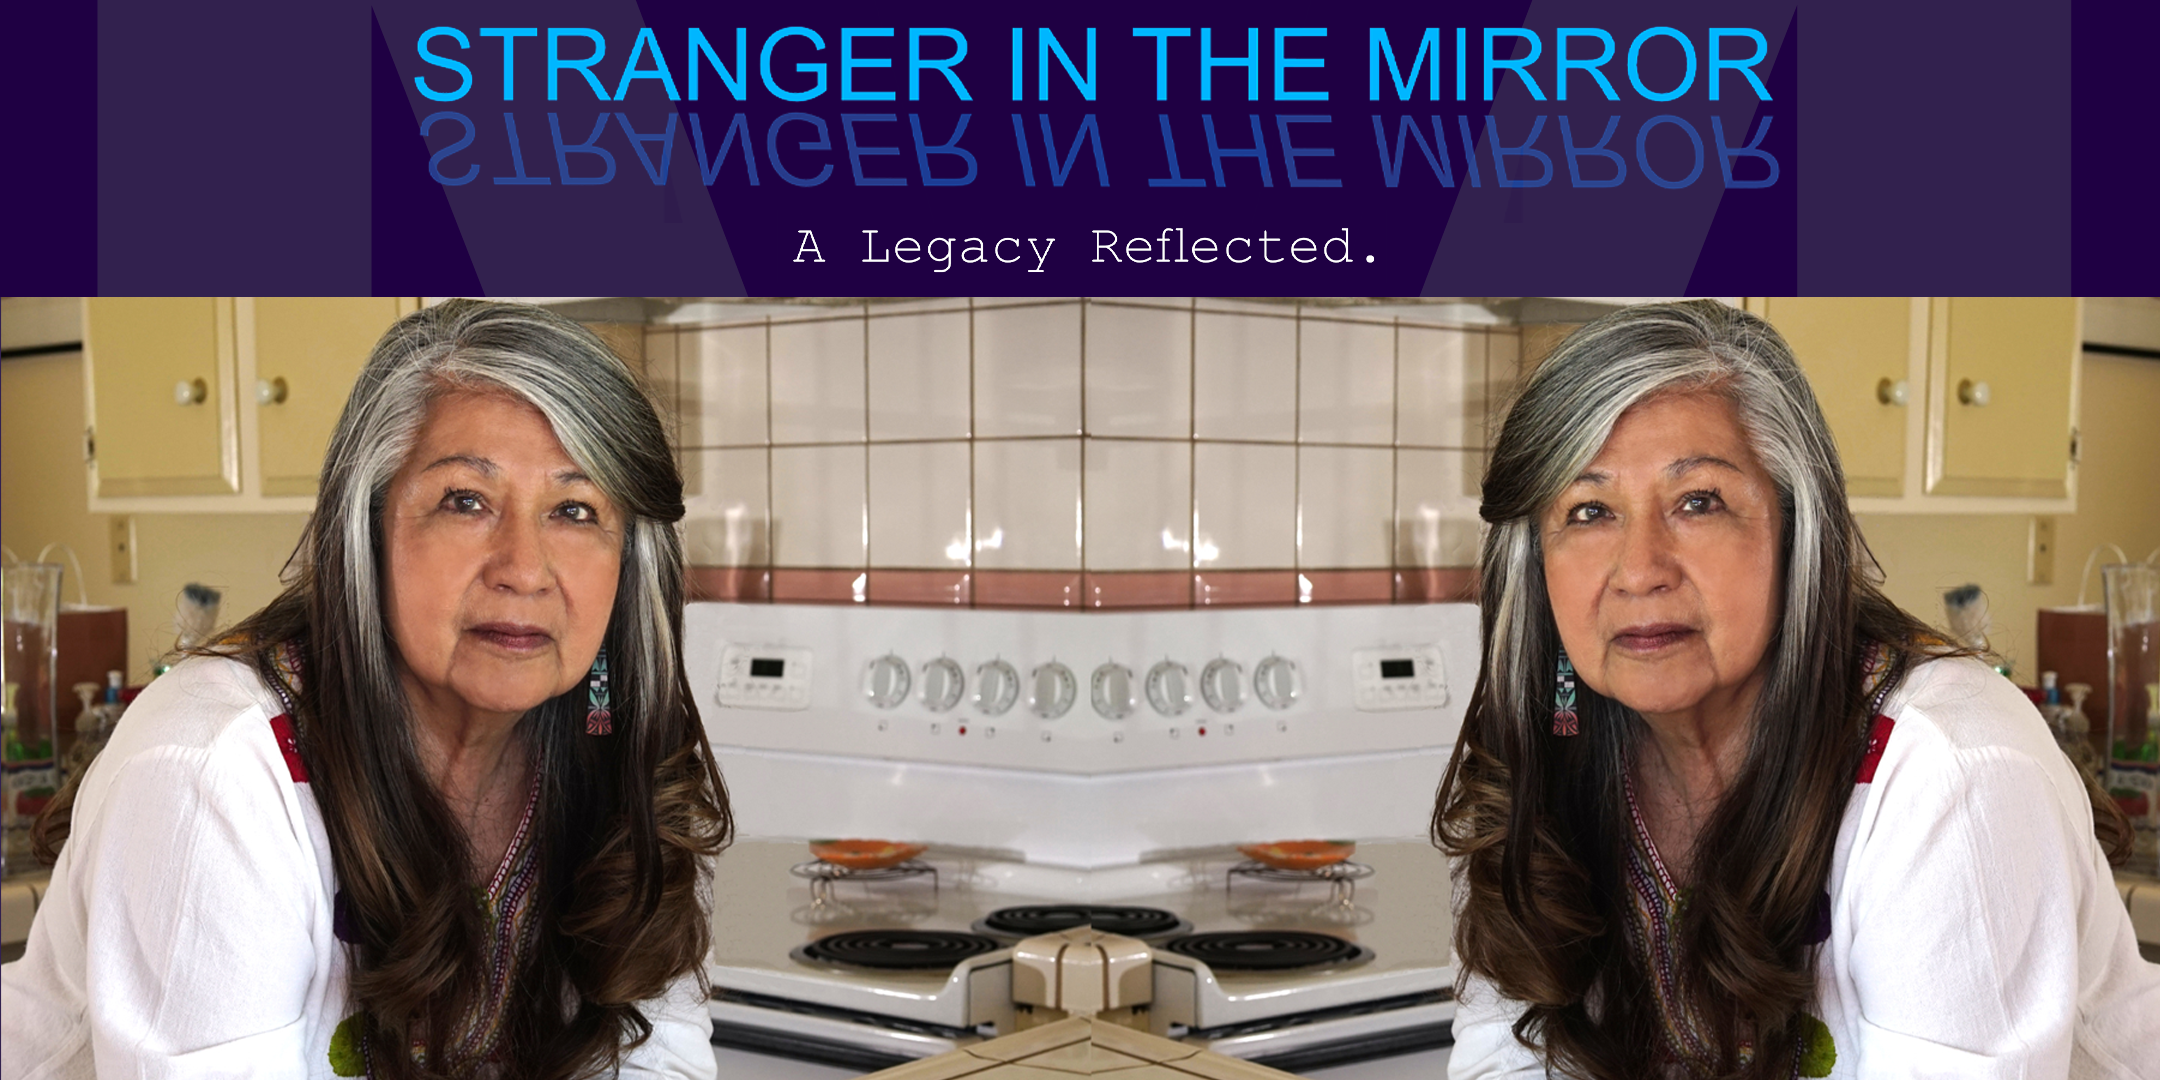 Stranger in the Mirror show poster featuring a older woman